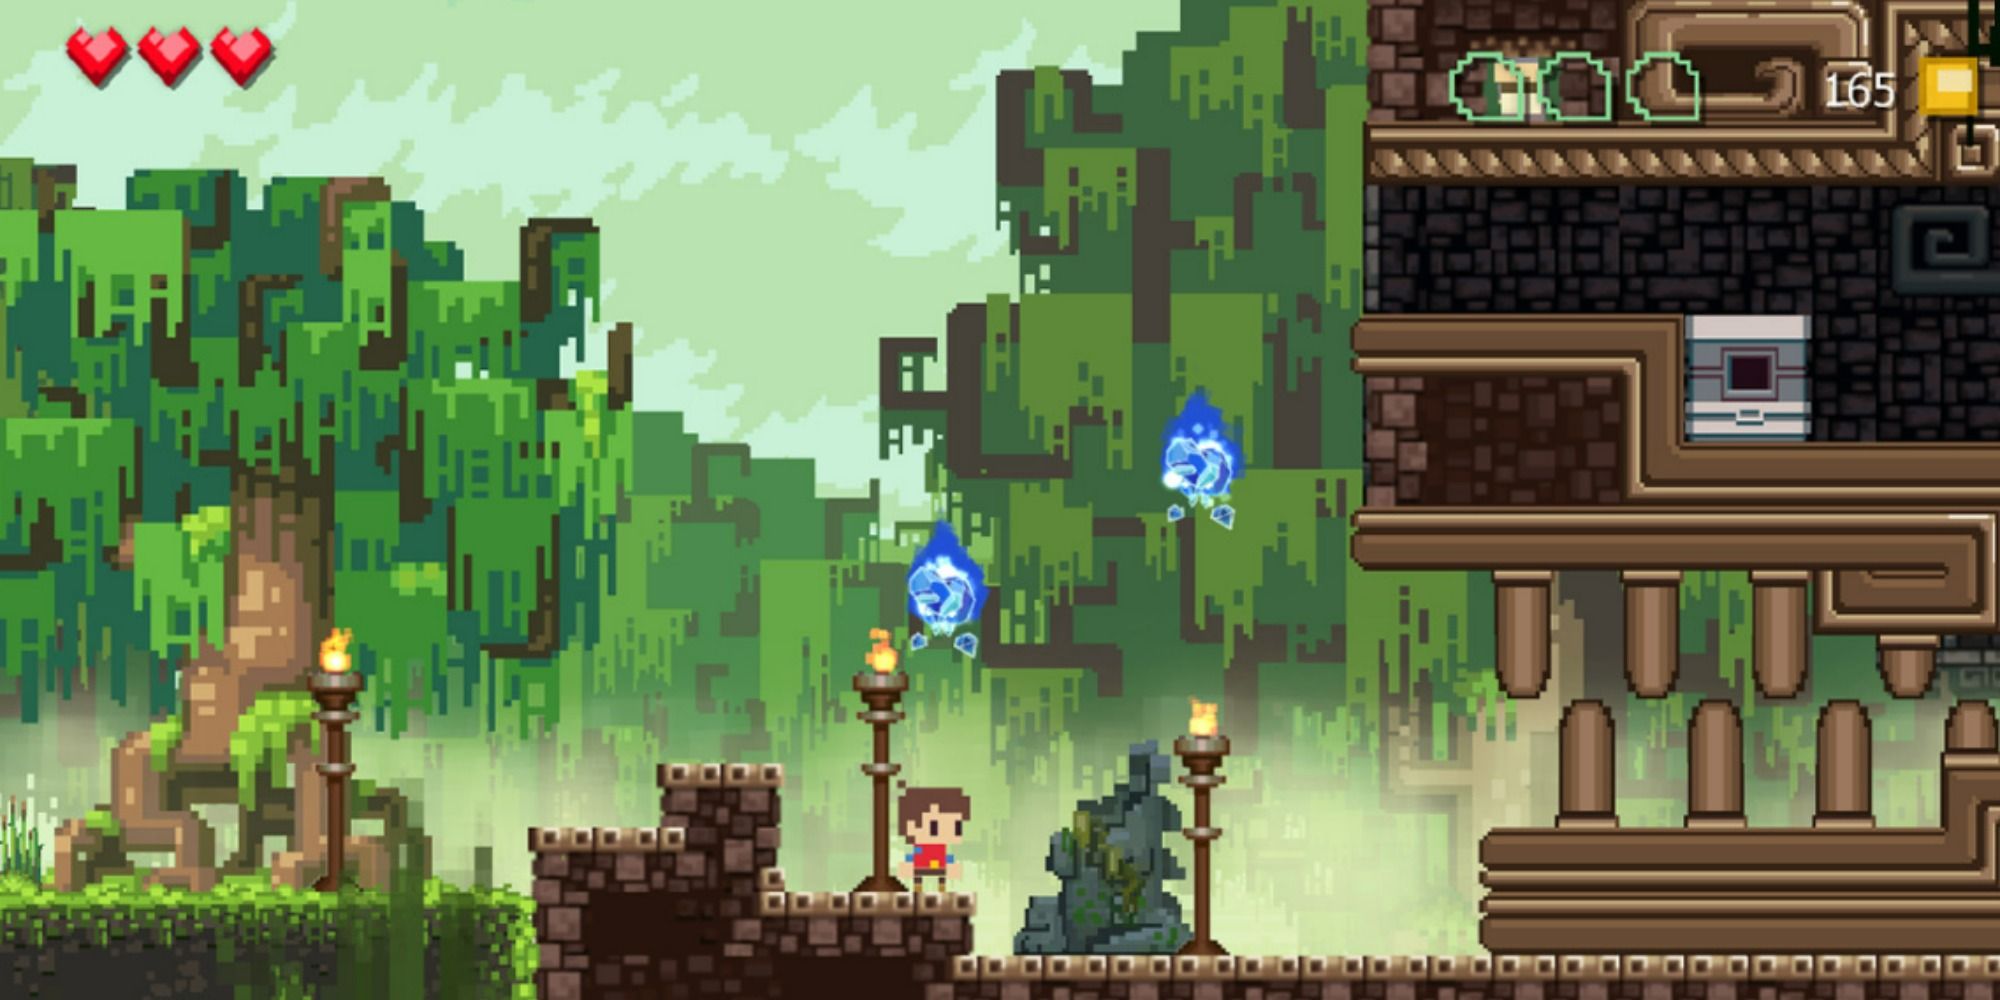 pip exploring a forest temple area in adventures of pip